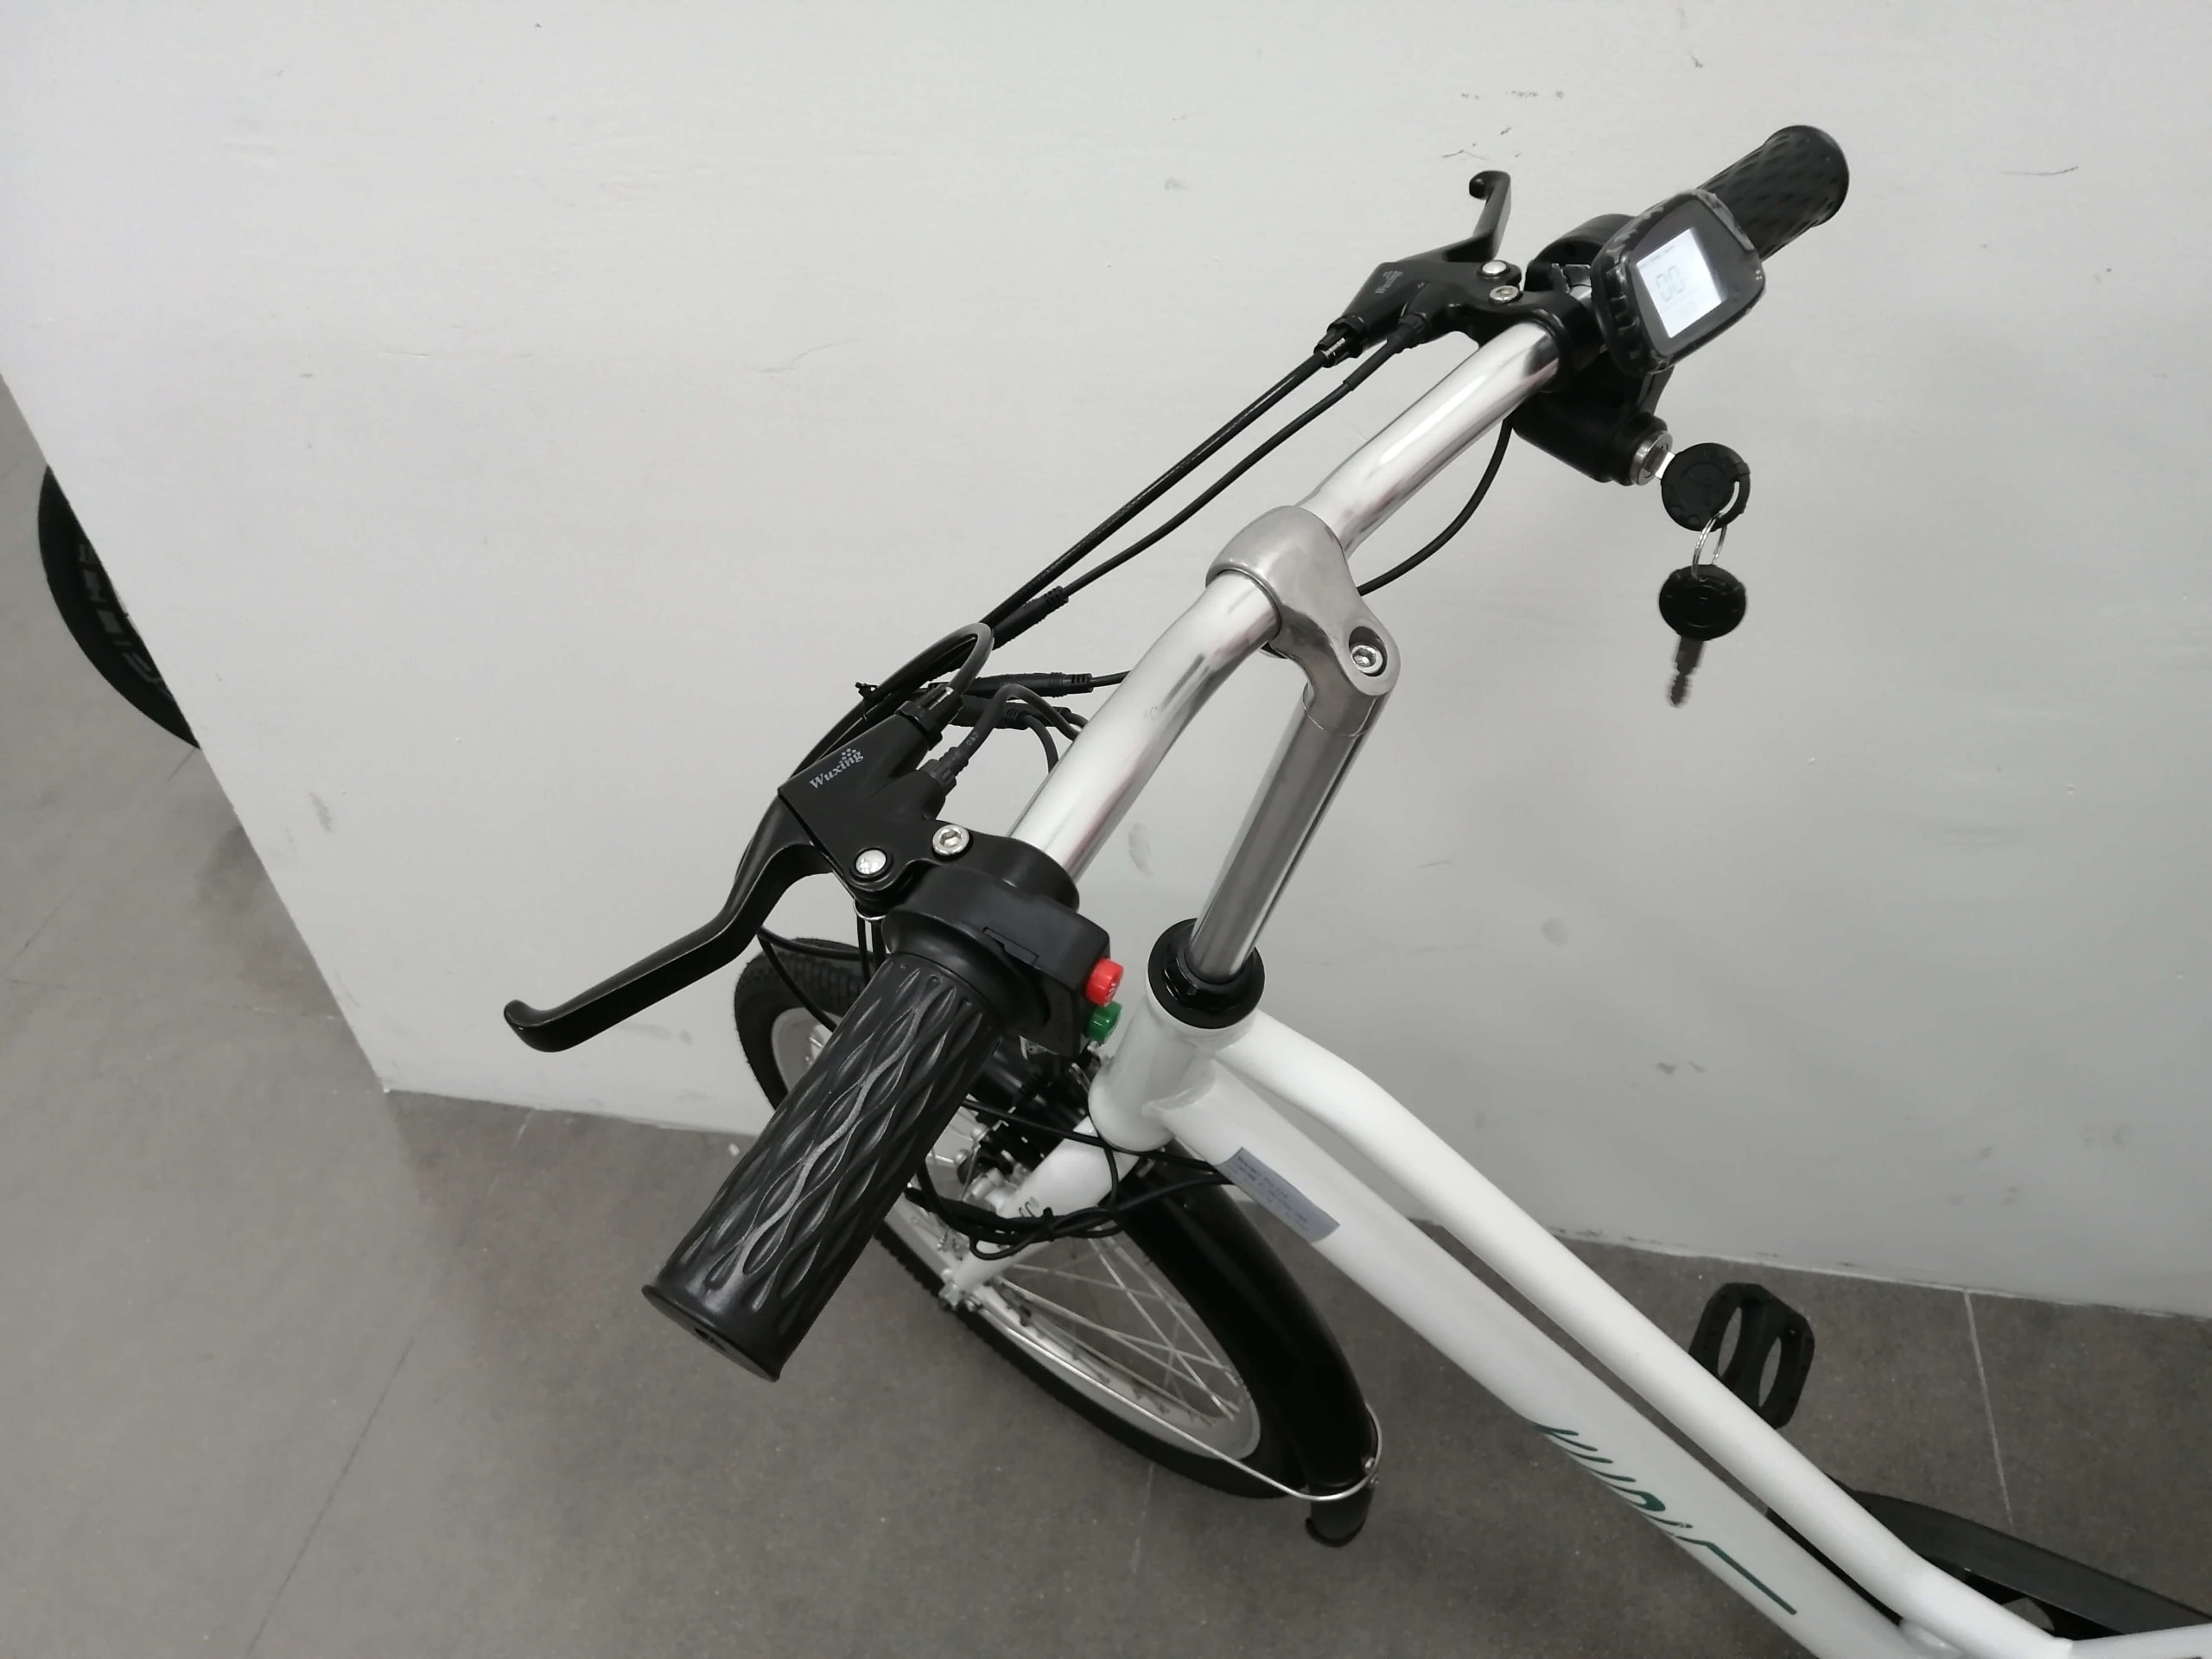 KUDU LTA approved ebike with key lock scaled - Review of JI-MOVE LC, the most compact LTA approved ebike?